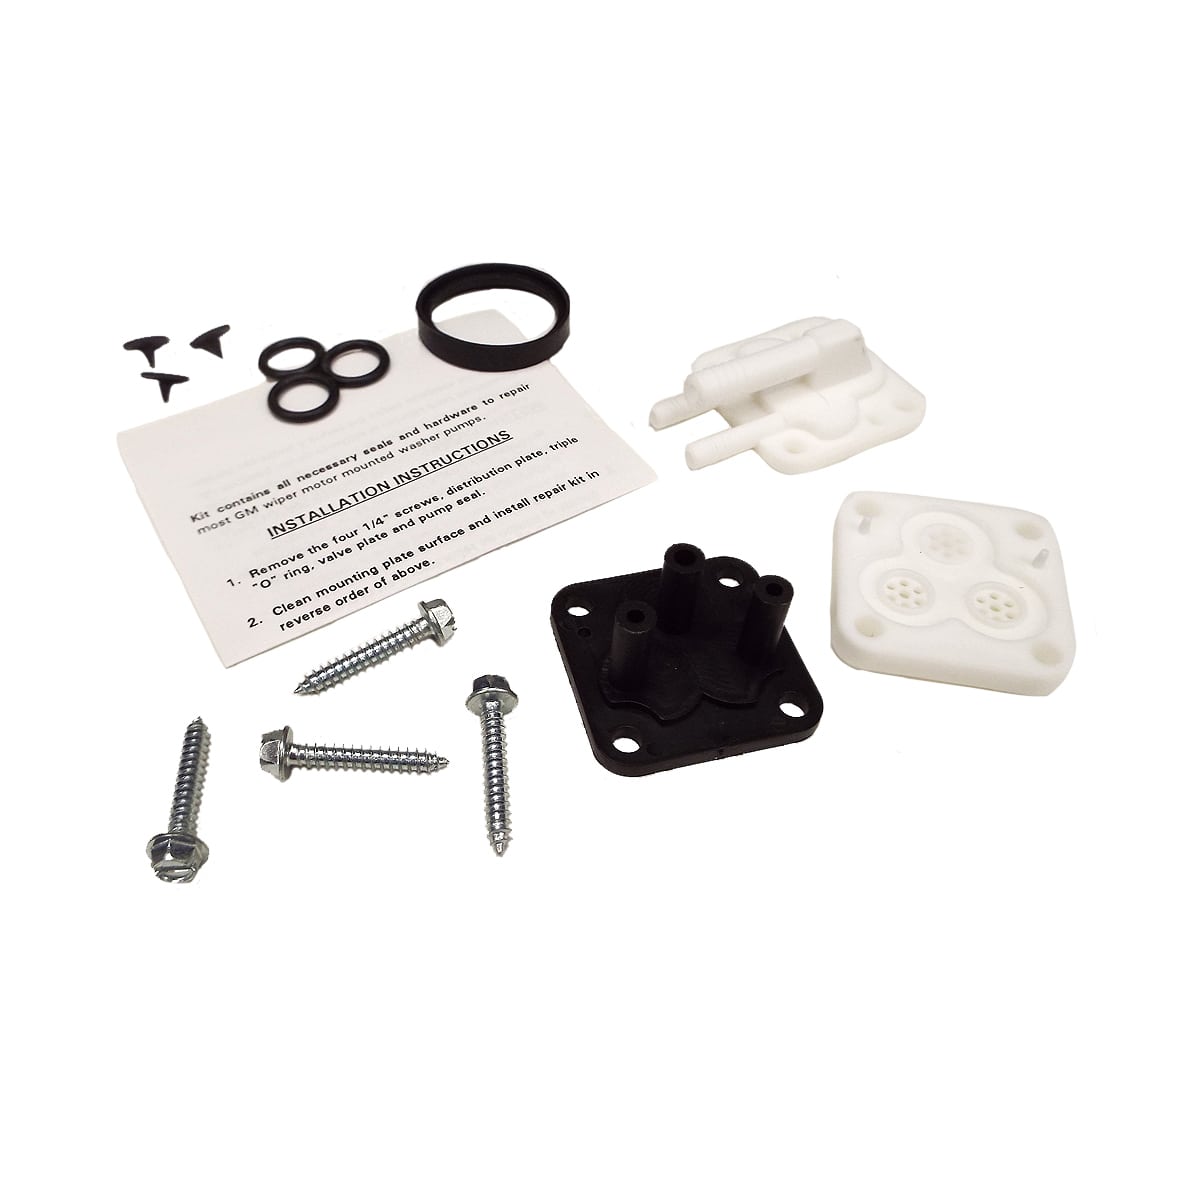 1964-1972 Rebuild Kit for Windshield Washer Pump Chevrolet and GMC Pickup Truck